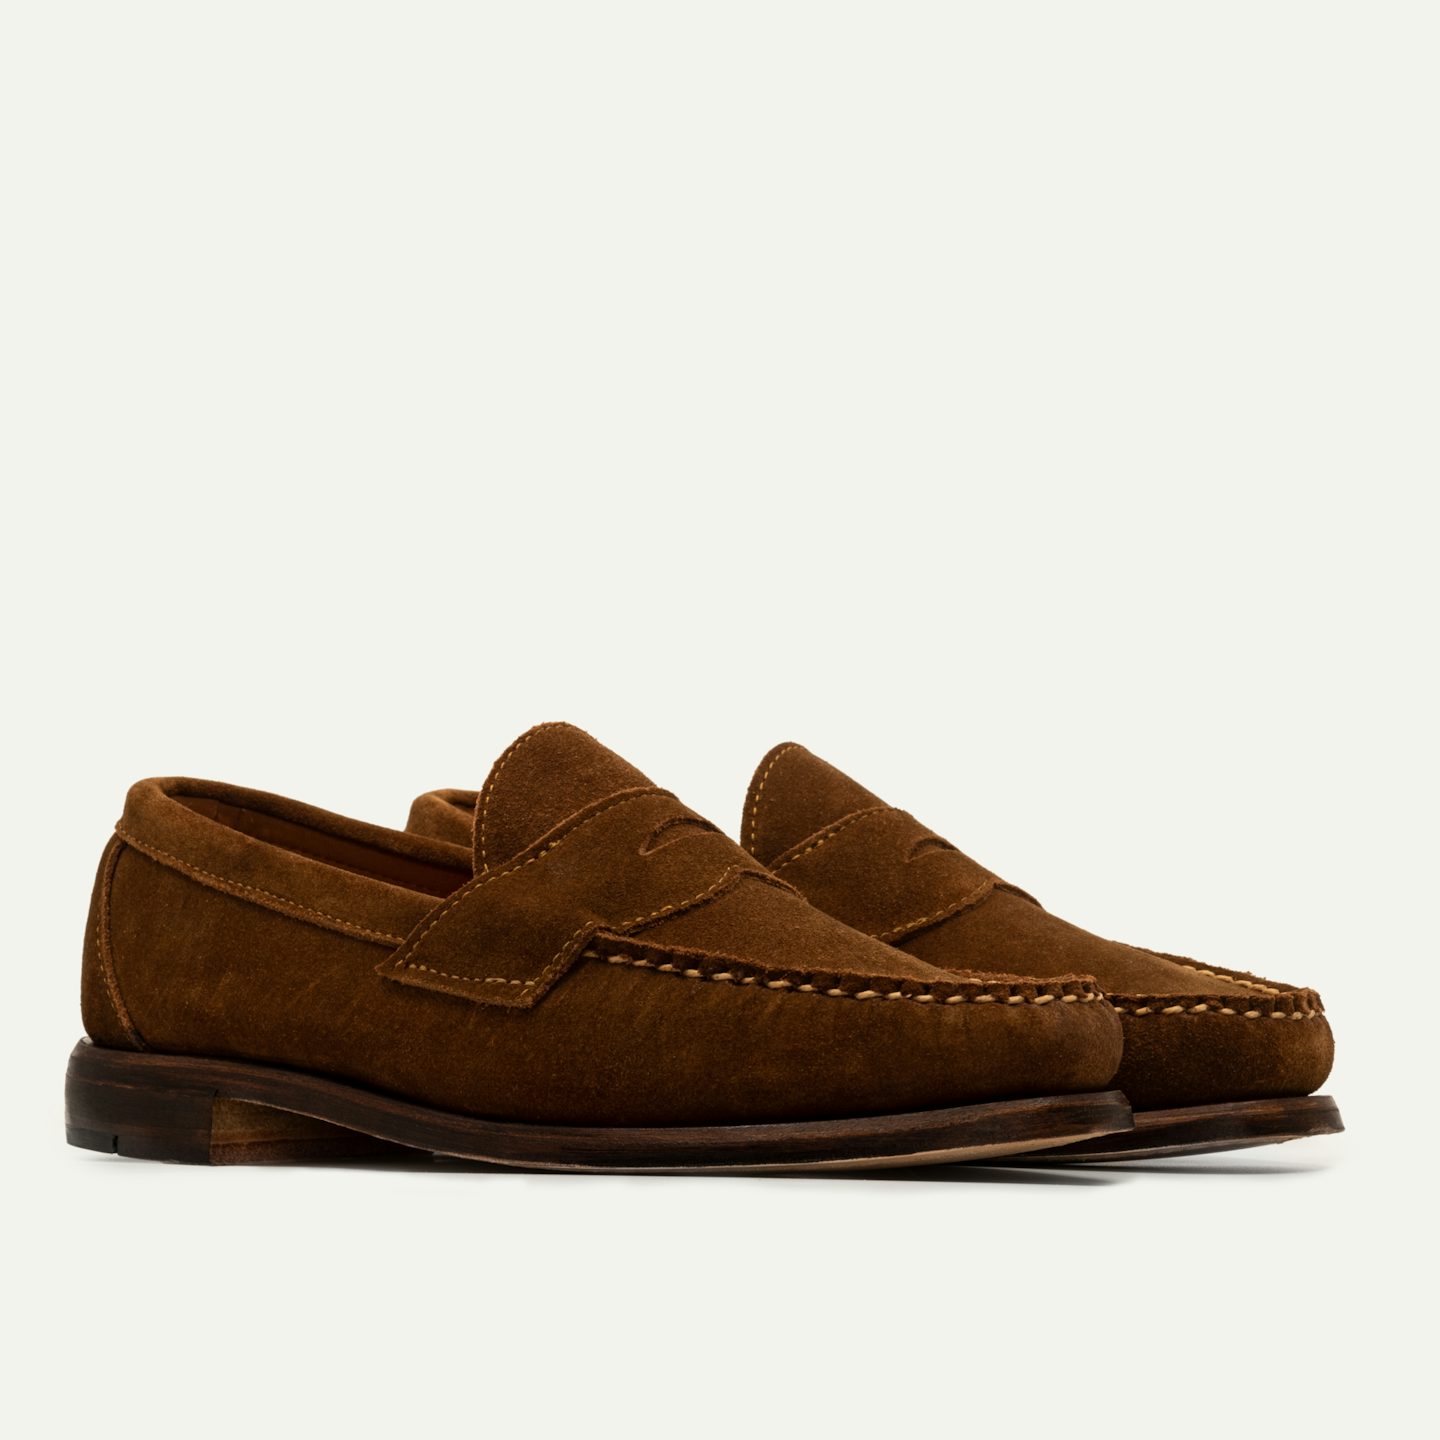 Penny Loafer - Snuff Repello Suede, Leather Sole with Dovetail 